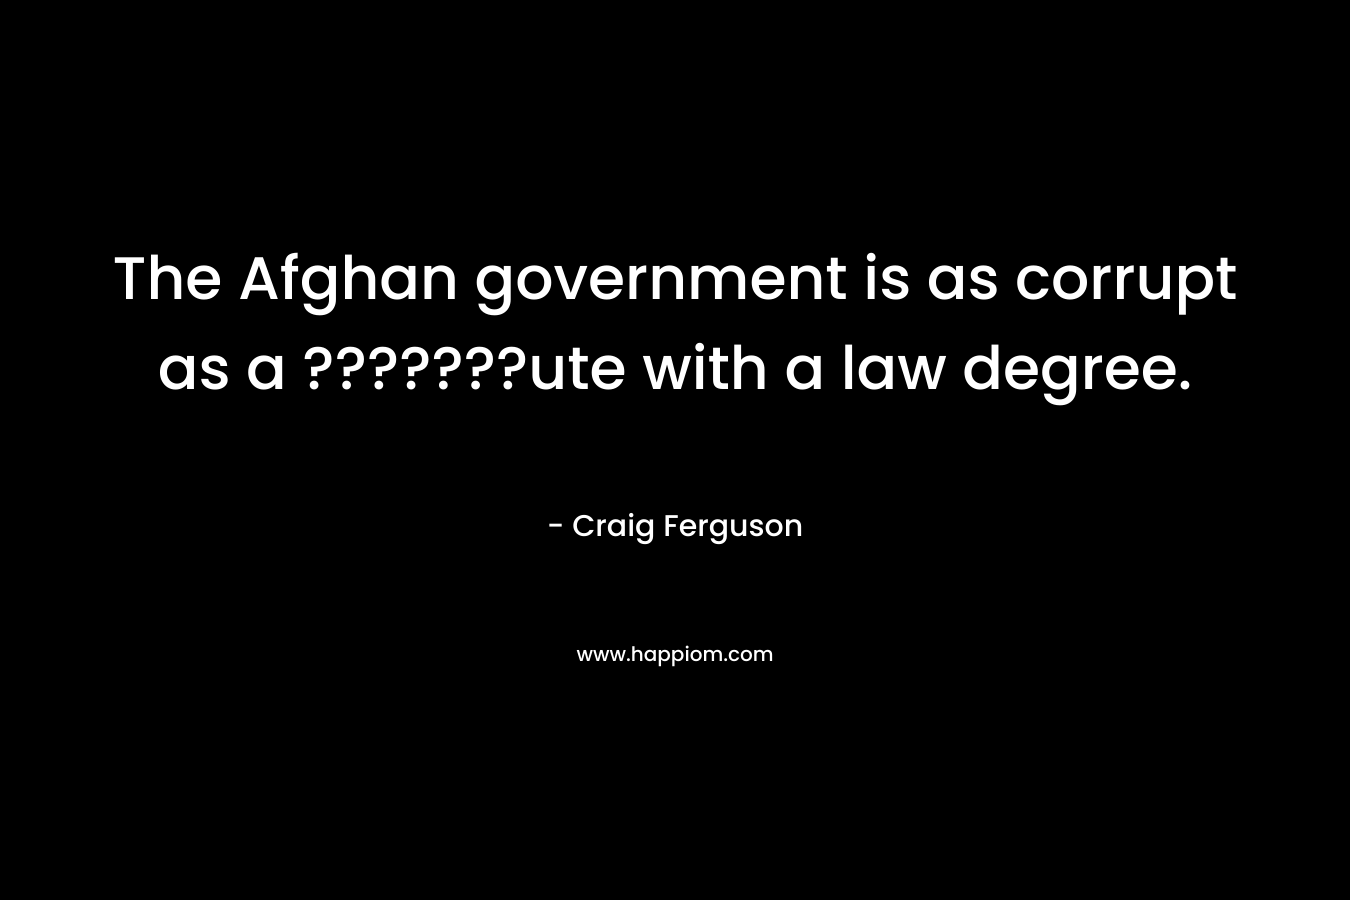 The Afghan government is as corrupt as a ???????ute with a law degree.